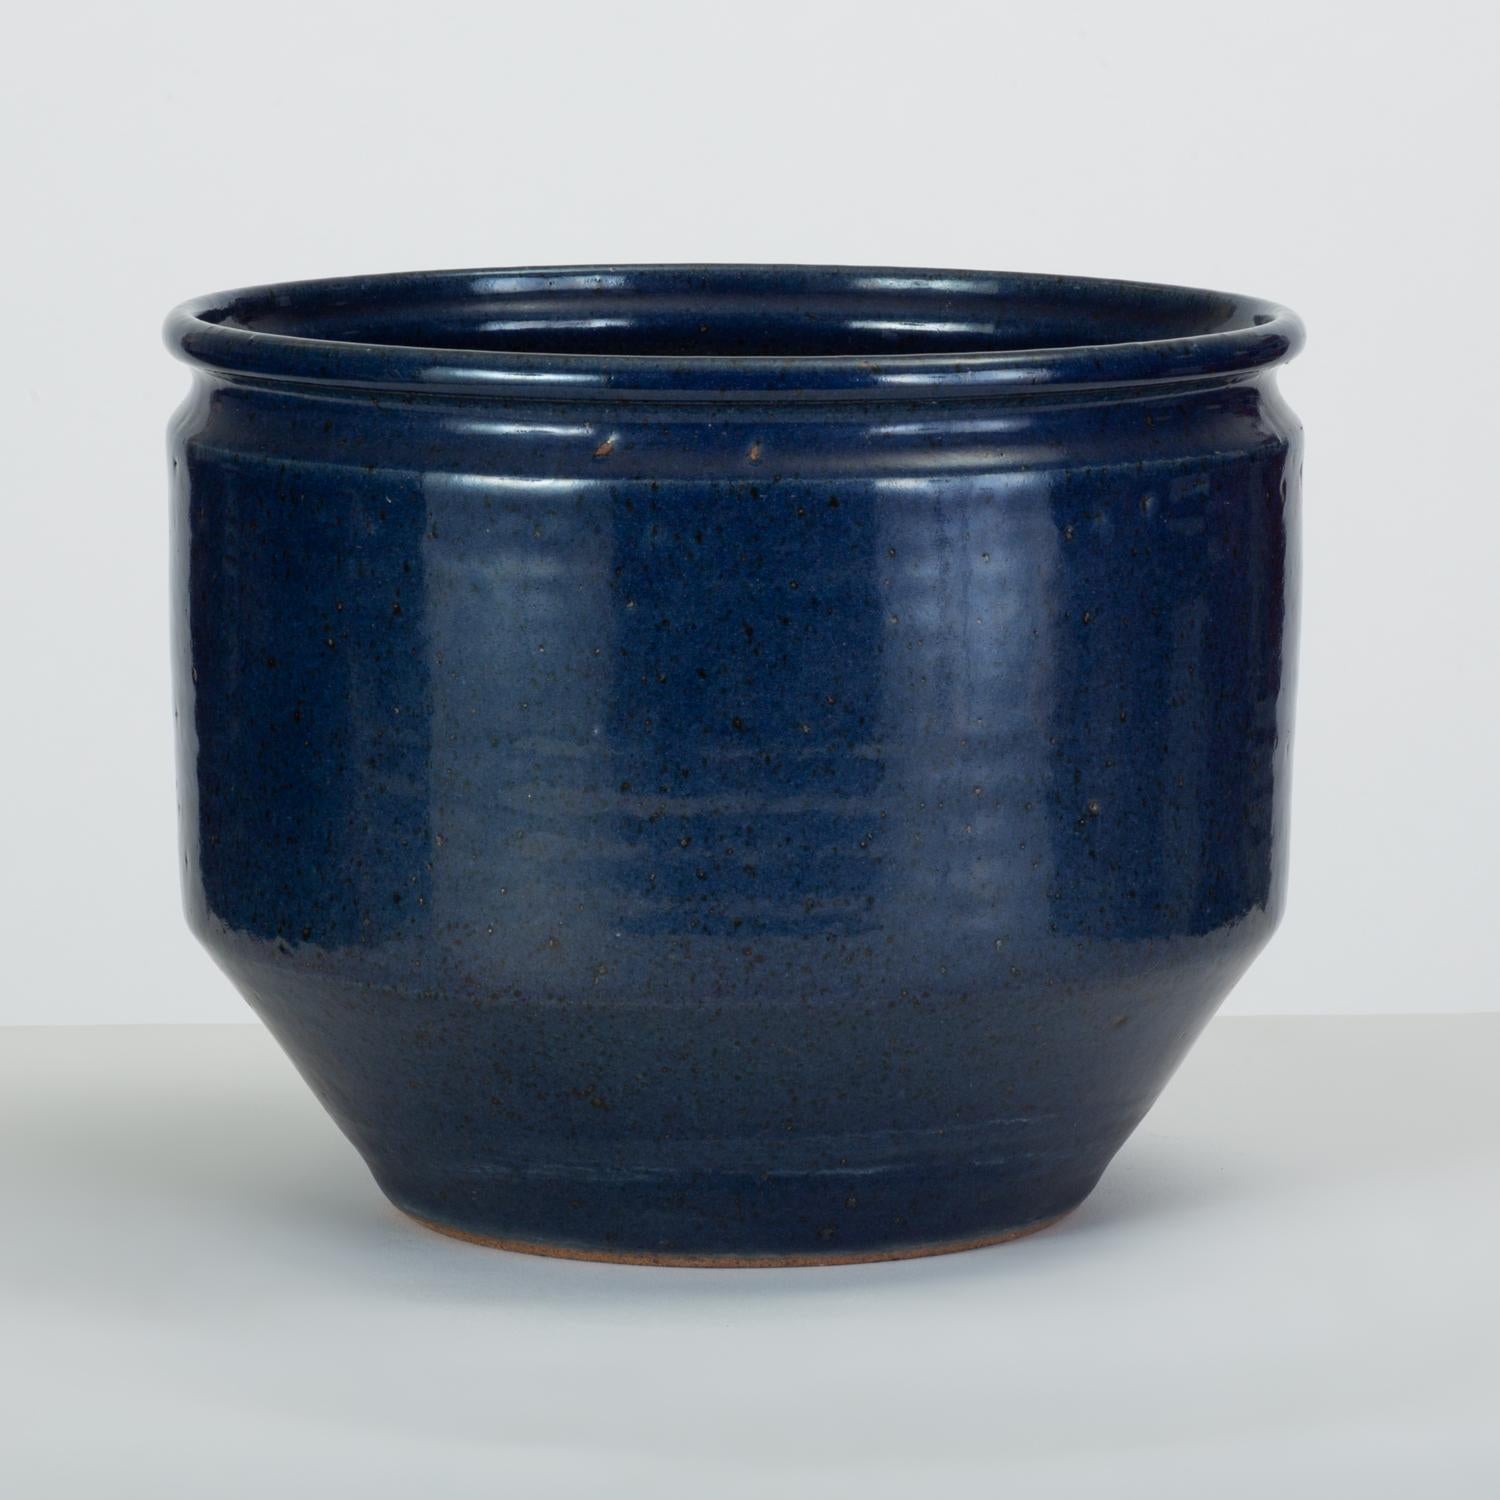 Pair of Blue-Glazed Earthgender Bowl Planters, David Cressey and Robert Maxwell 7